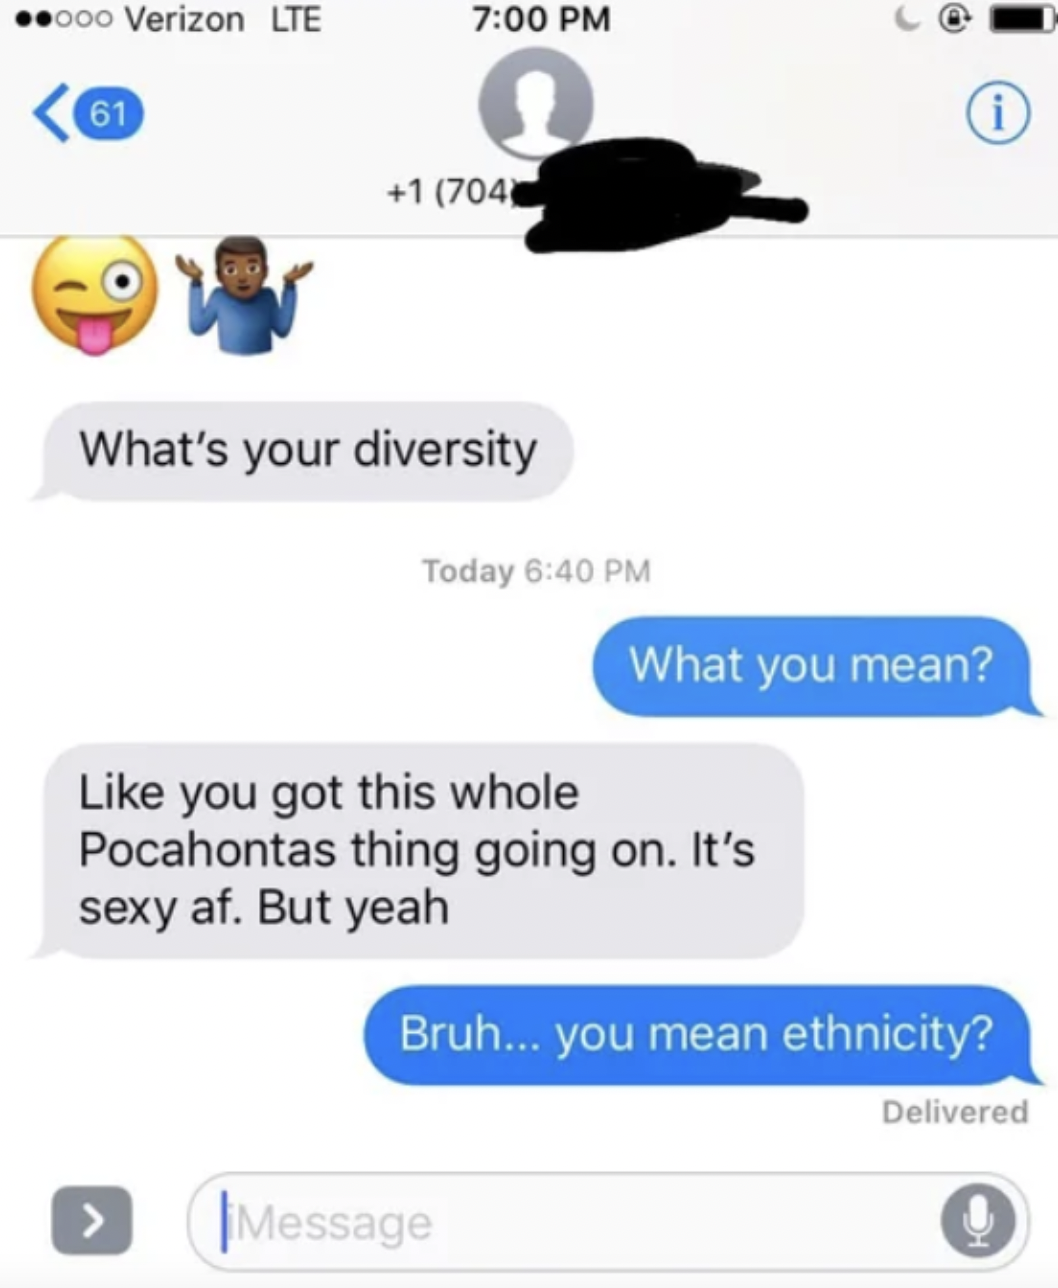 cringe pics - web page - 000 Verizon Lte 61 1 704 What's your diversity Today you got this whole Pocahontas thing going on. It's sexy af. But yeah Message J O i What you mean? Bruh... you mean ethnicity? Delivered